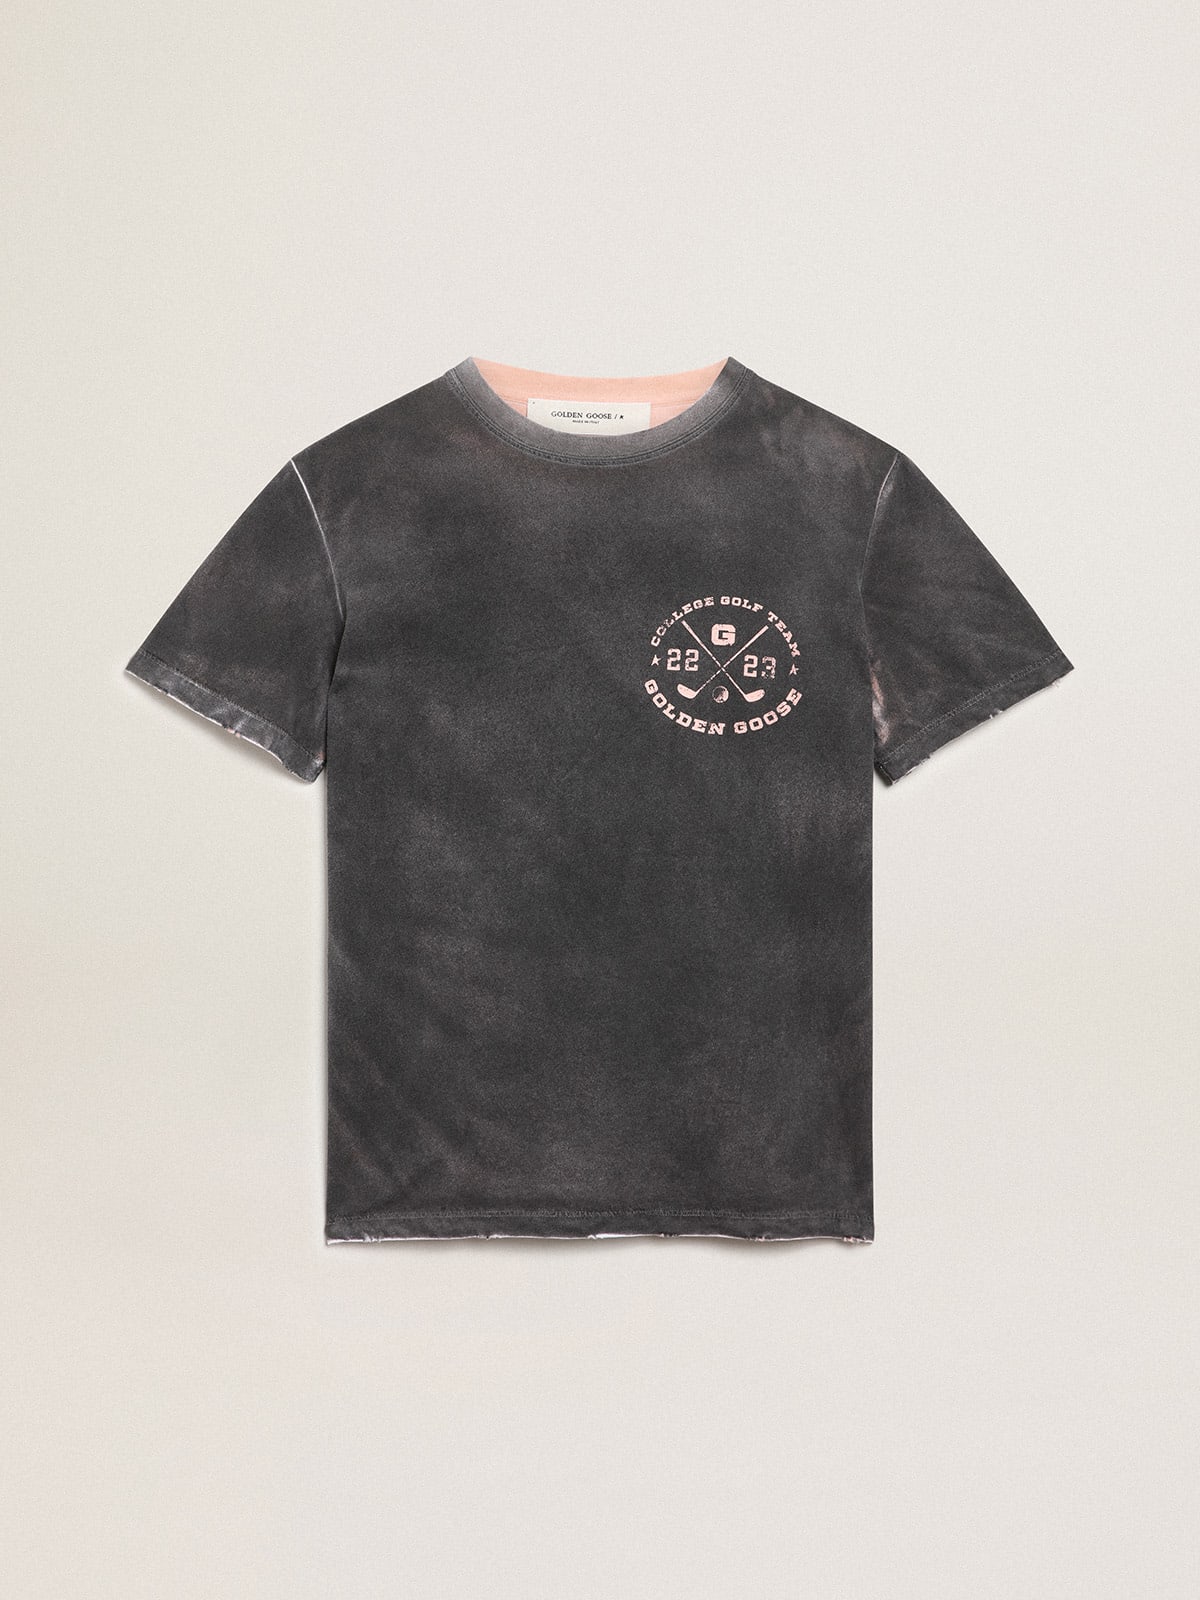 Aged-look gray Journey Collection T-shirt with contrasting pale pink print on the front and hand-worn areas on the edging